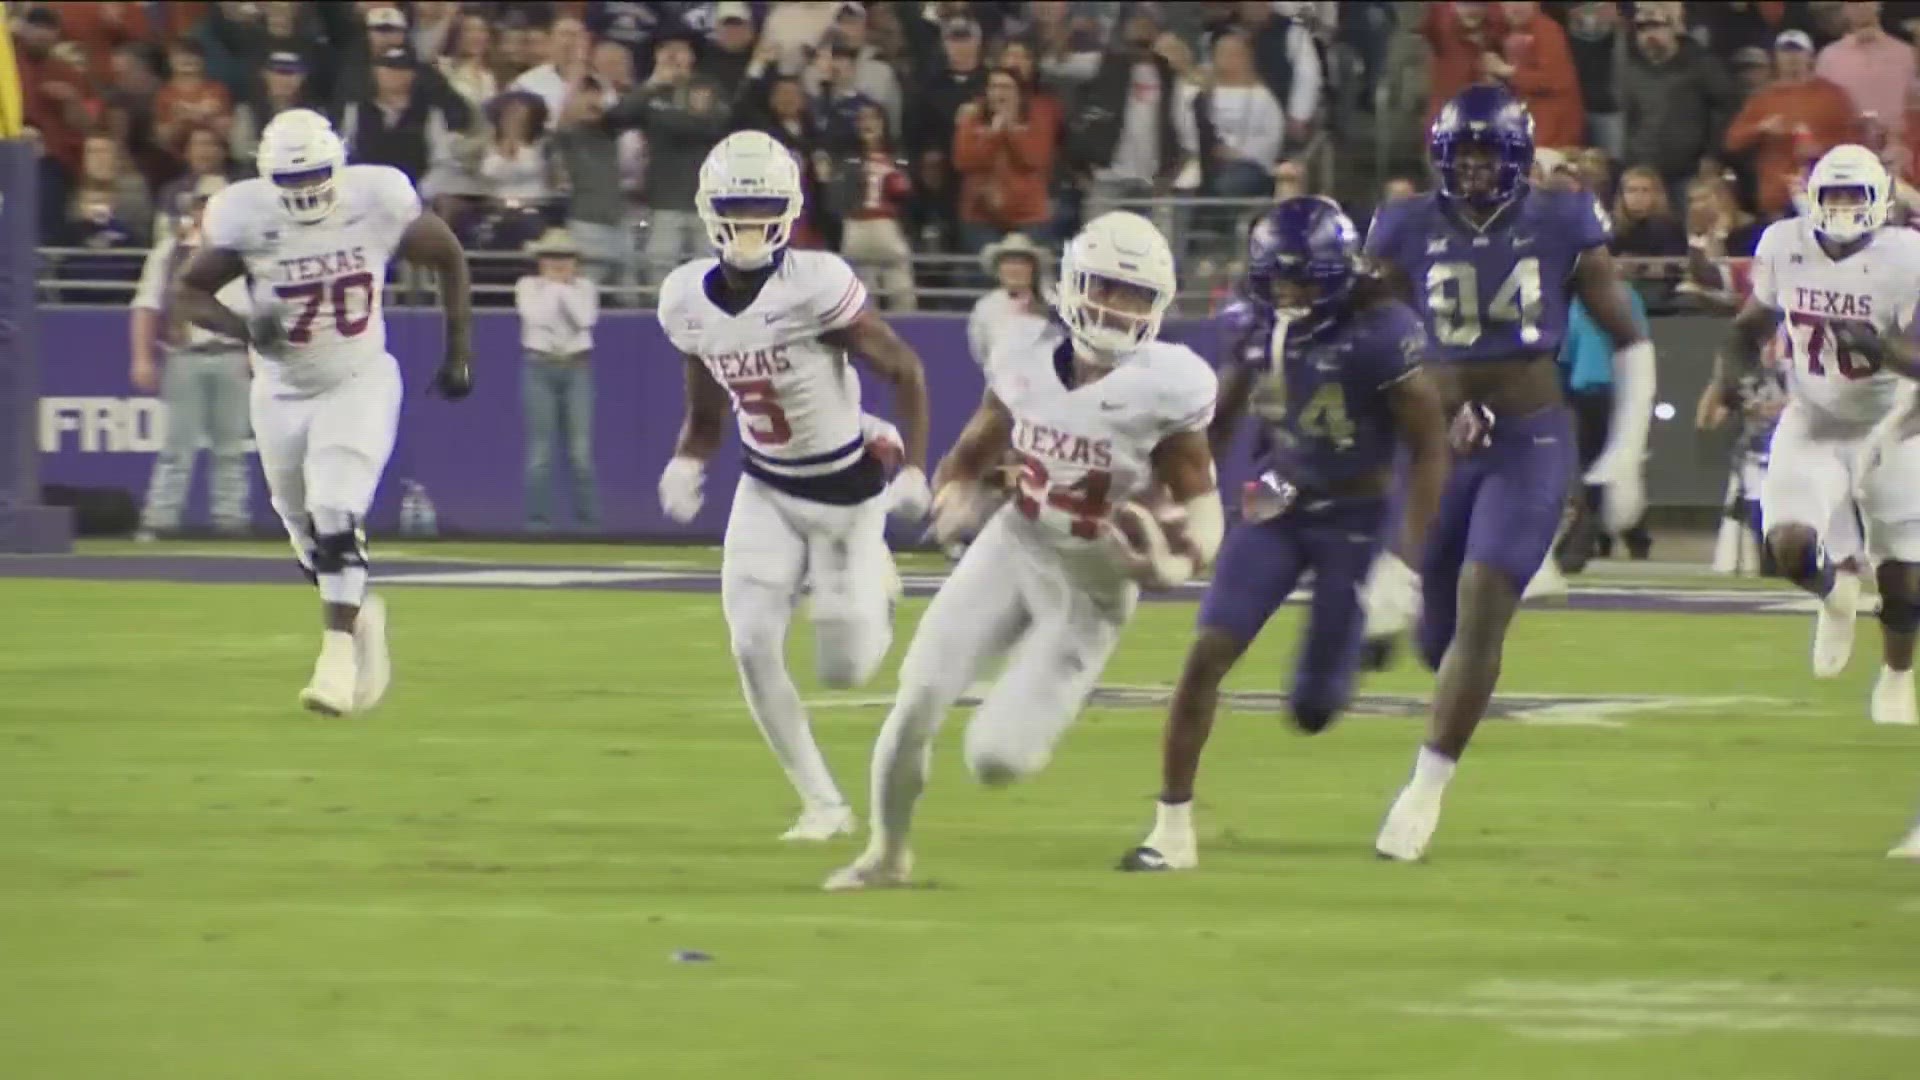 The Texas star running back suffered a season-ending torn ACL in the game against TCU.